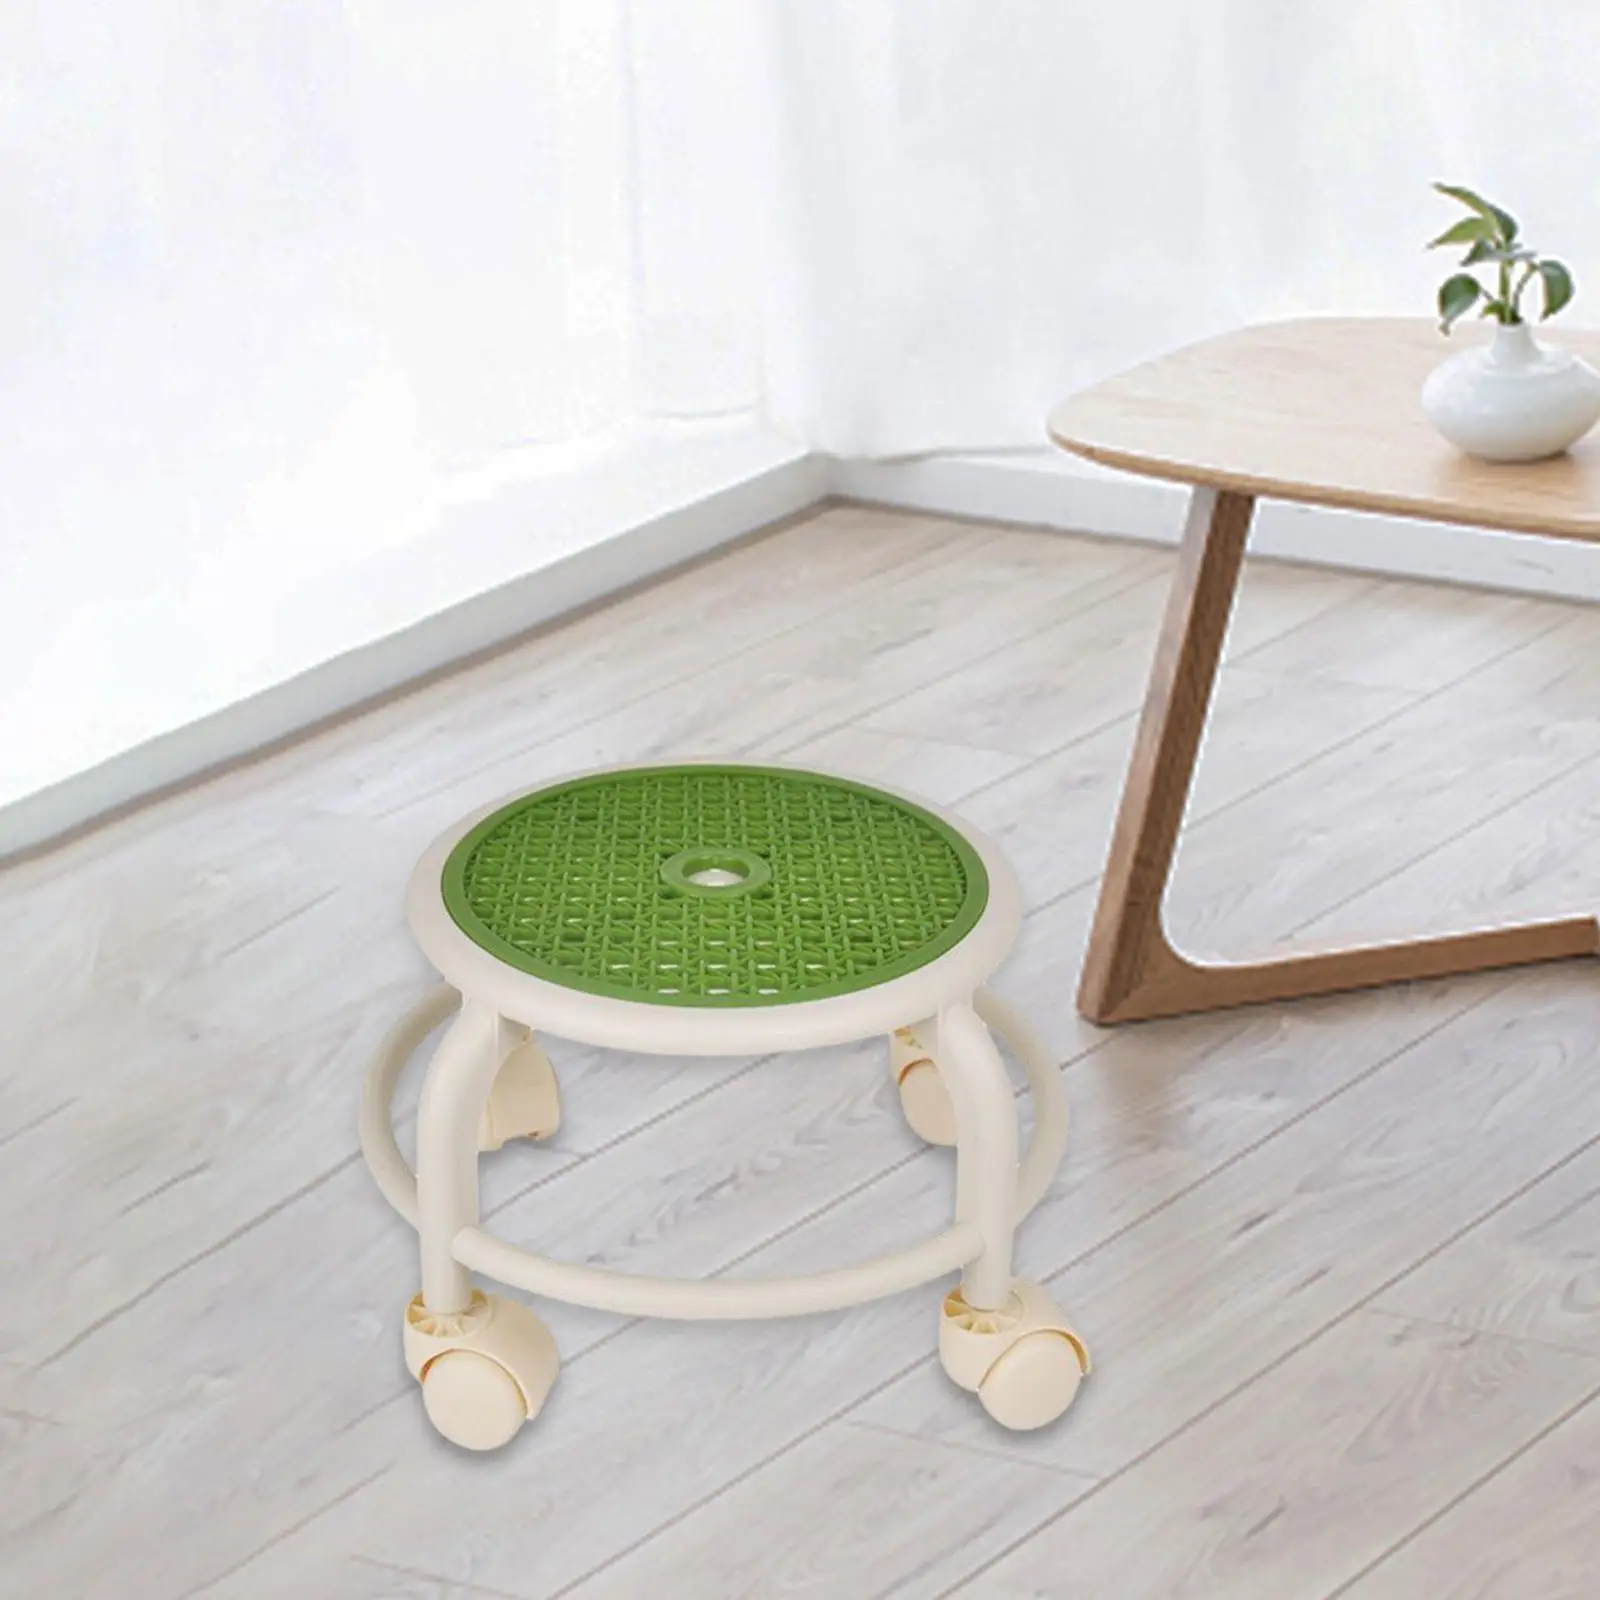 Low Roller Seat Small Lazy Housework Stool Round Shoe Changing Stool Seat for Kids and Adult Barber Shop Living Room Home